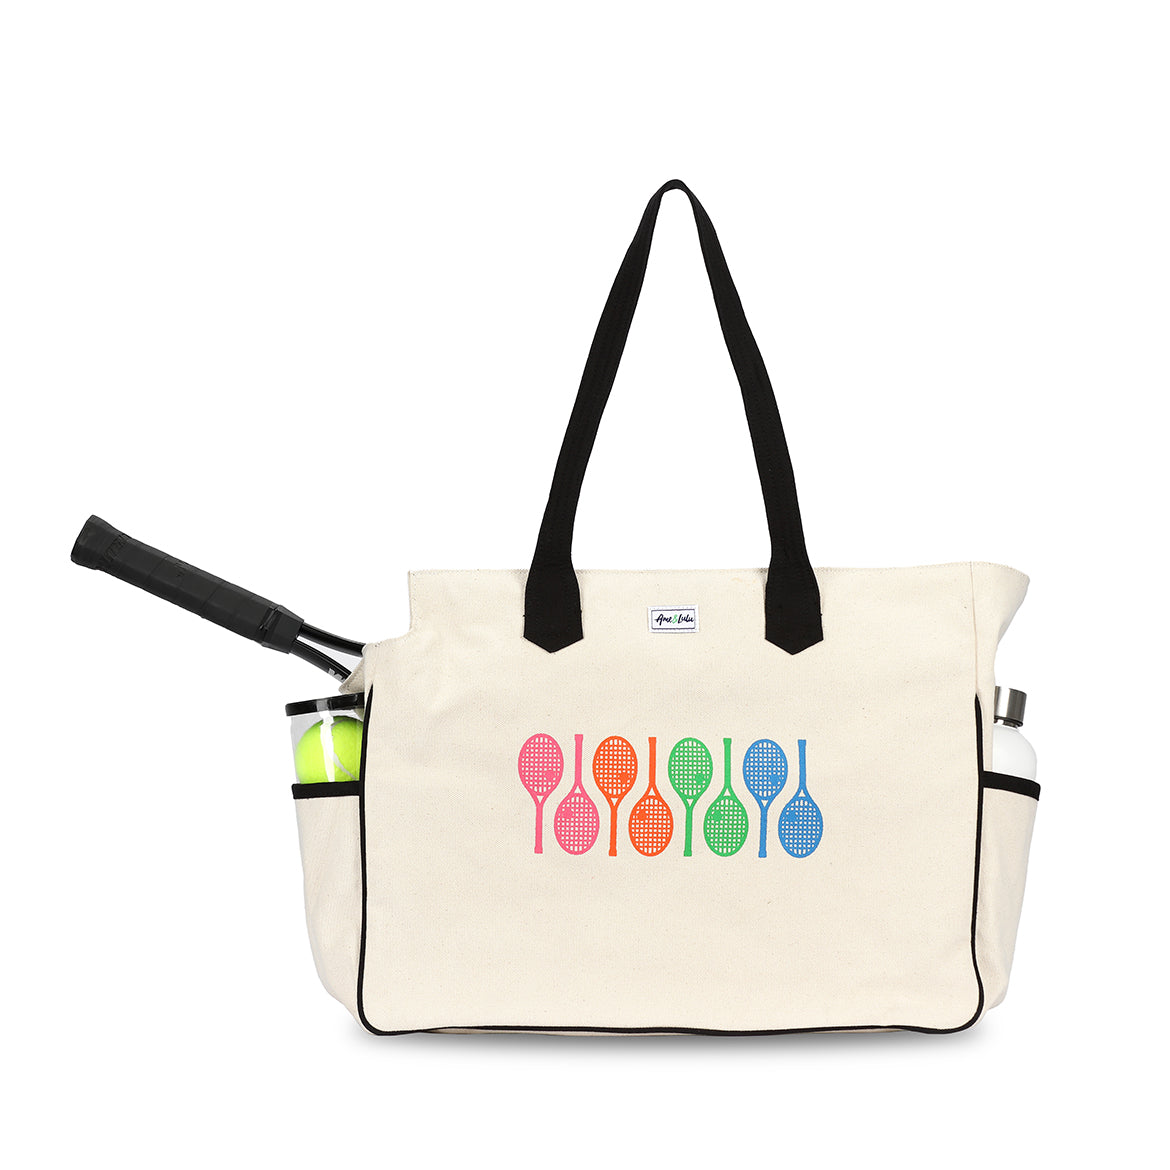 Front view of love all court bag. Large canvas tennis bag with tennis racquet inside and side pocket holding water bottle and tennis balls. Front has rainbow tennis racquets printed across it.